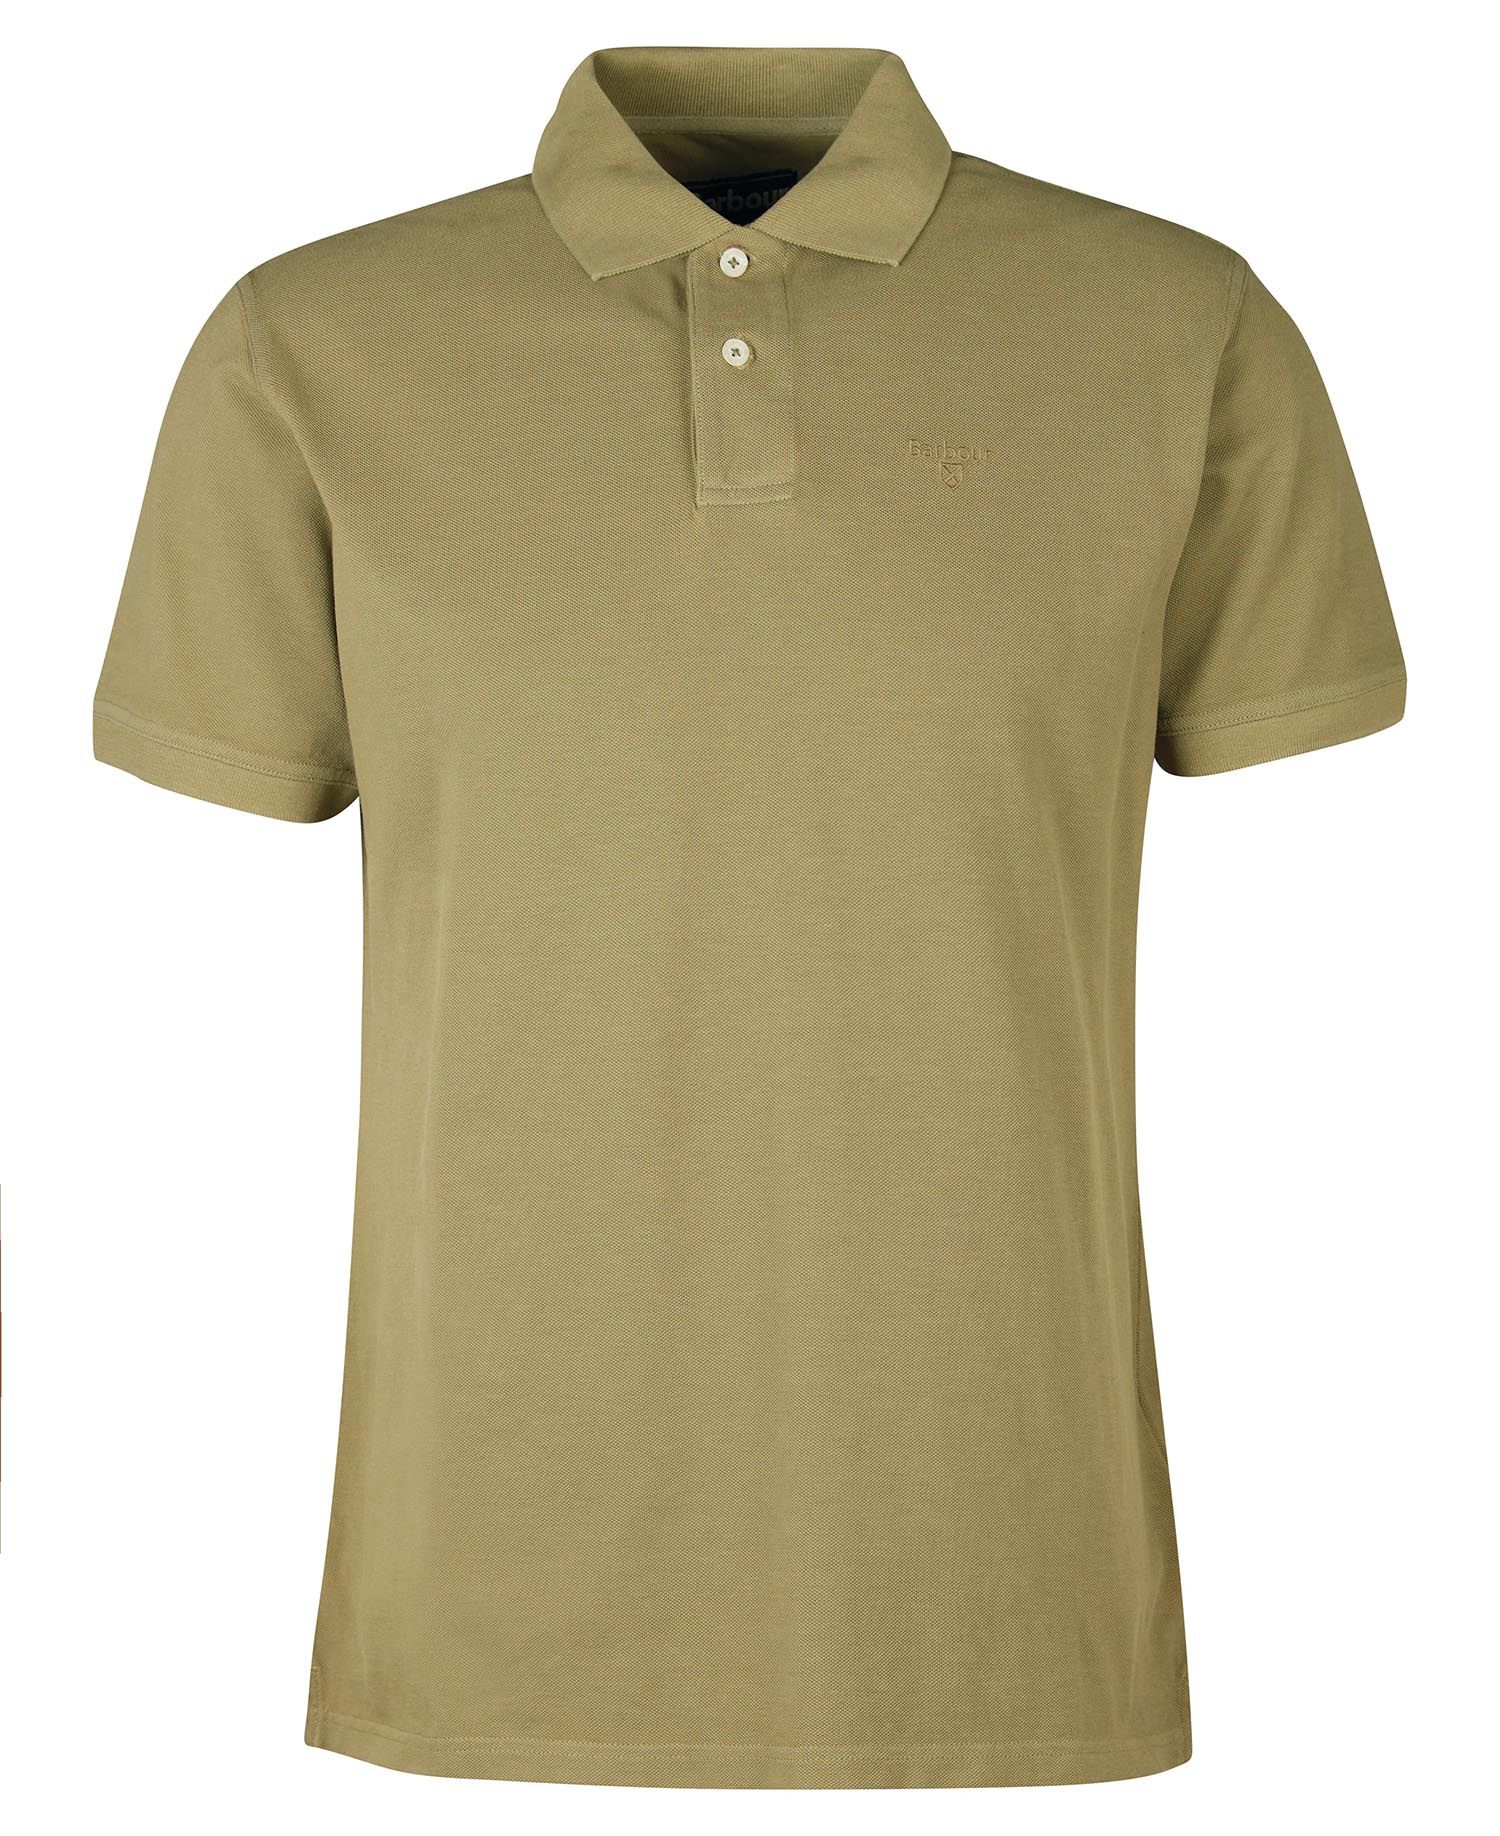 Men's Washed Sports Polo - Bleached Olive